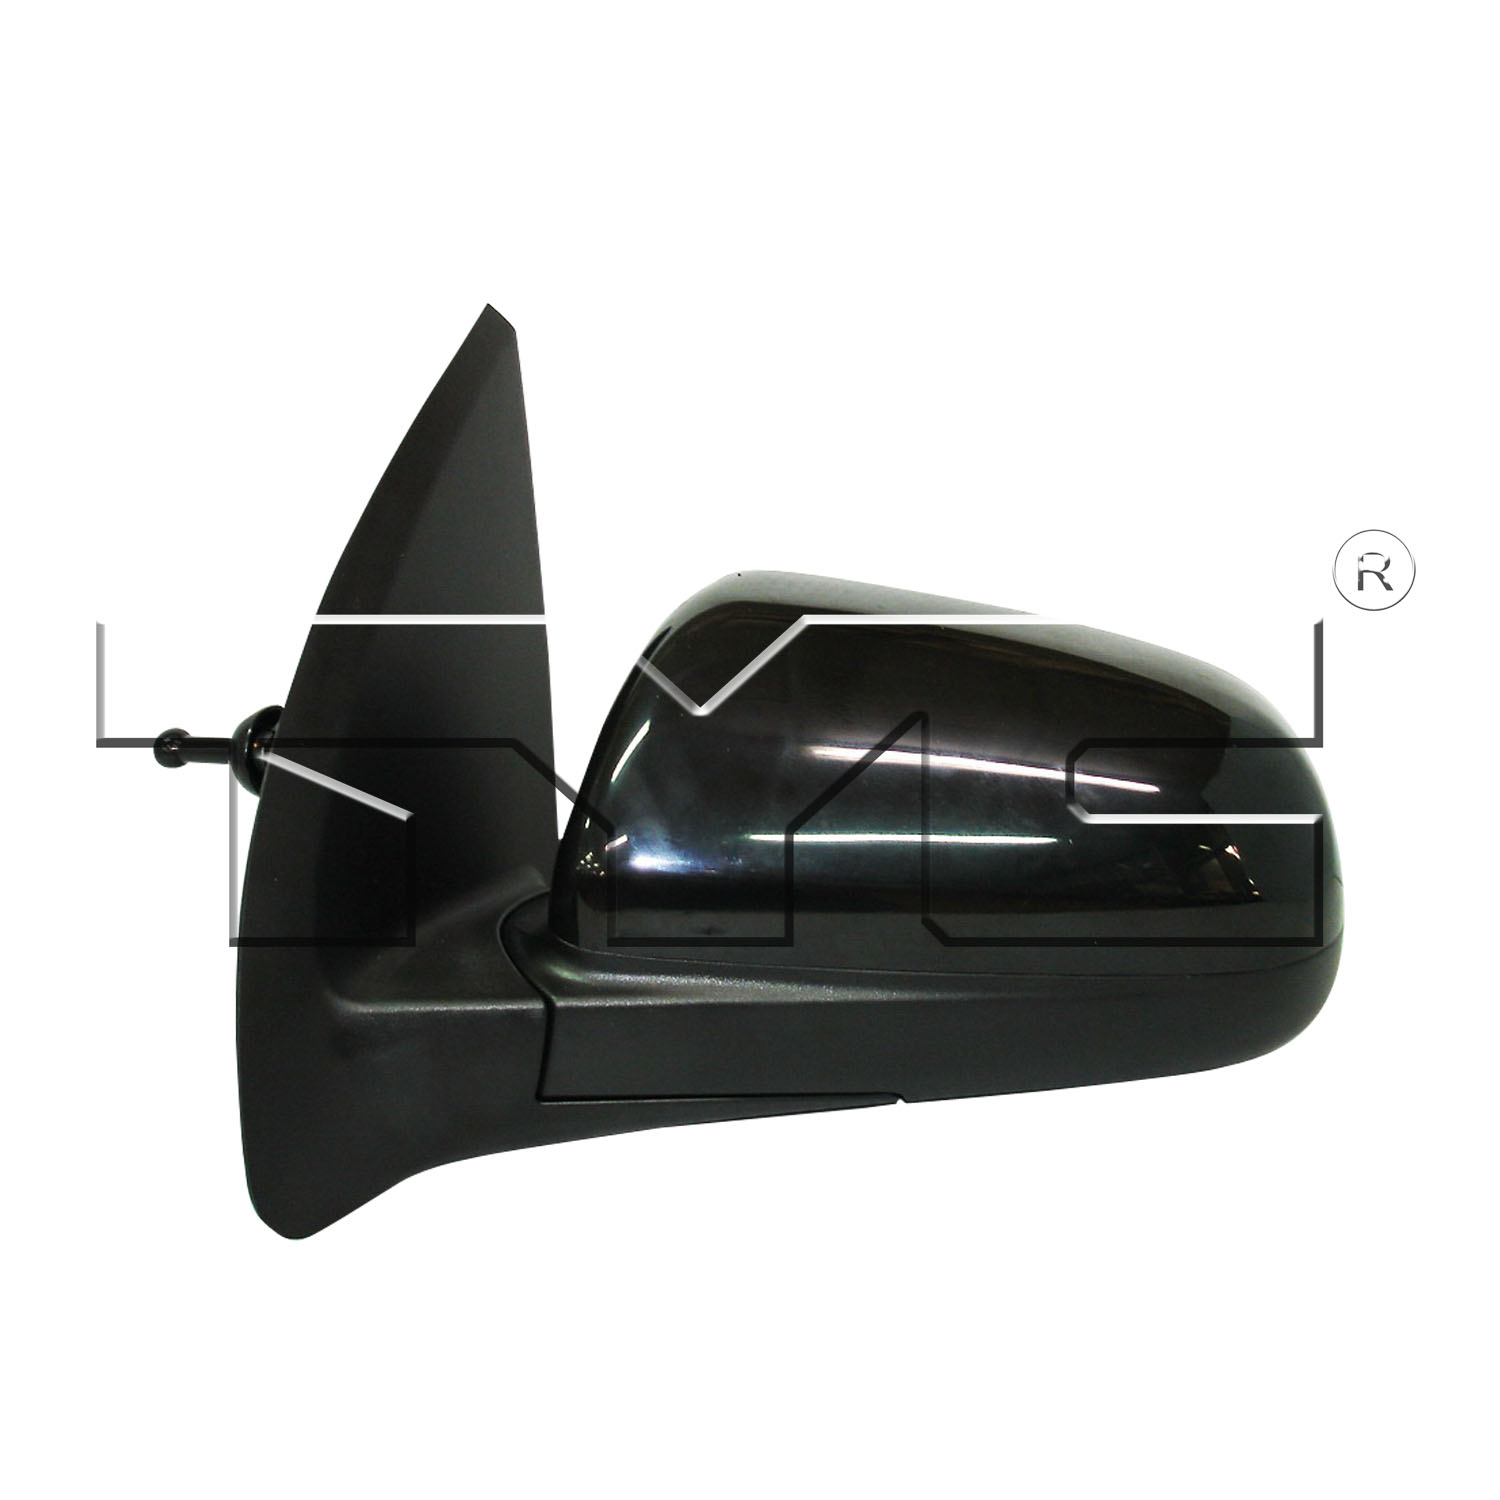 Aftermarket MIRRORS for CHEVROLET - AVEO, AVEO,07-11,LT Mirror outside rear view